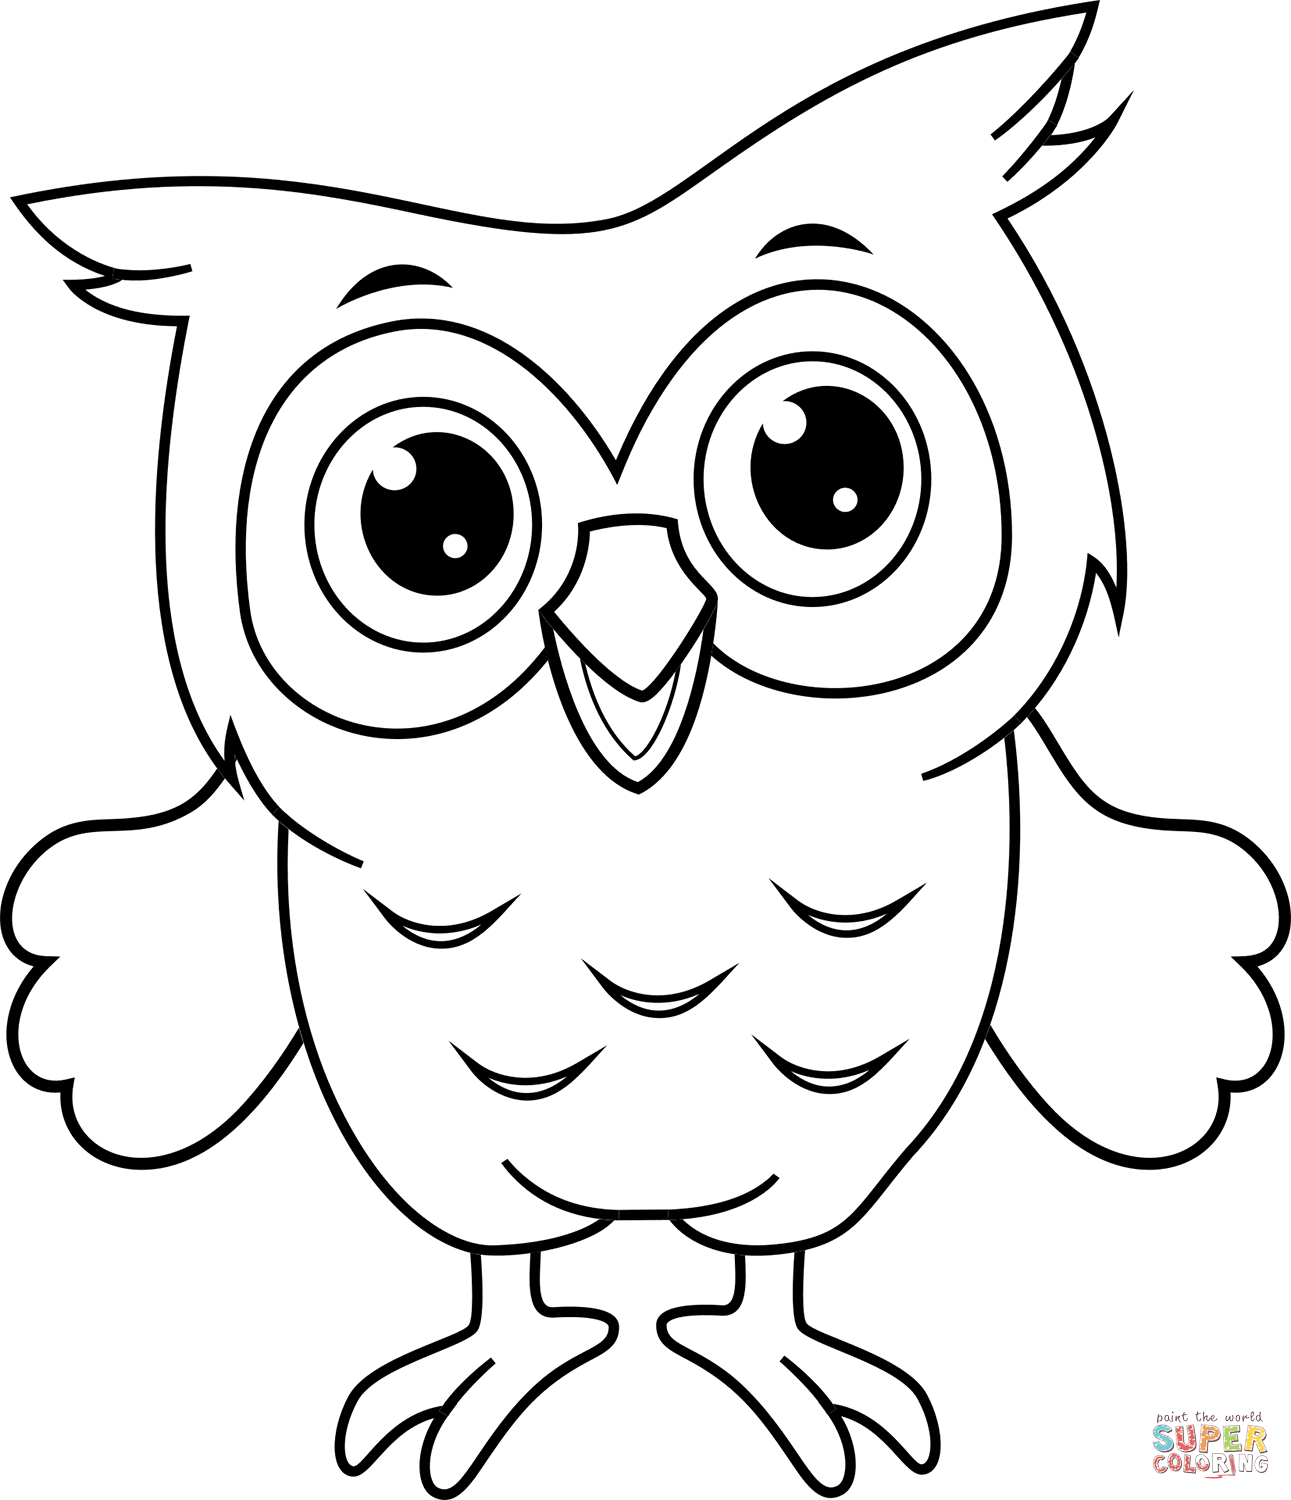 Cute owl coloring page free printable coloring pages